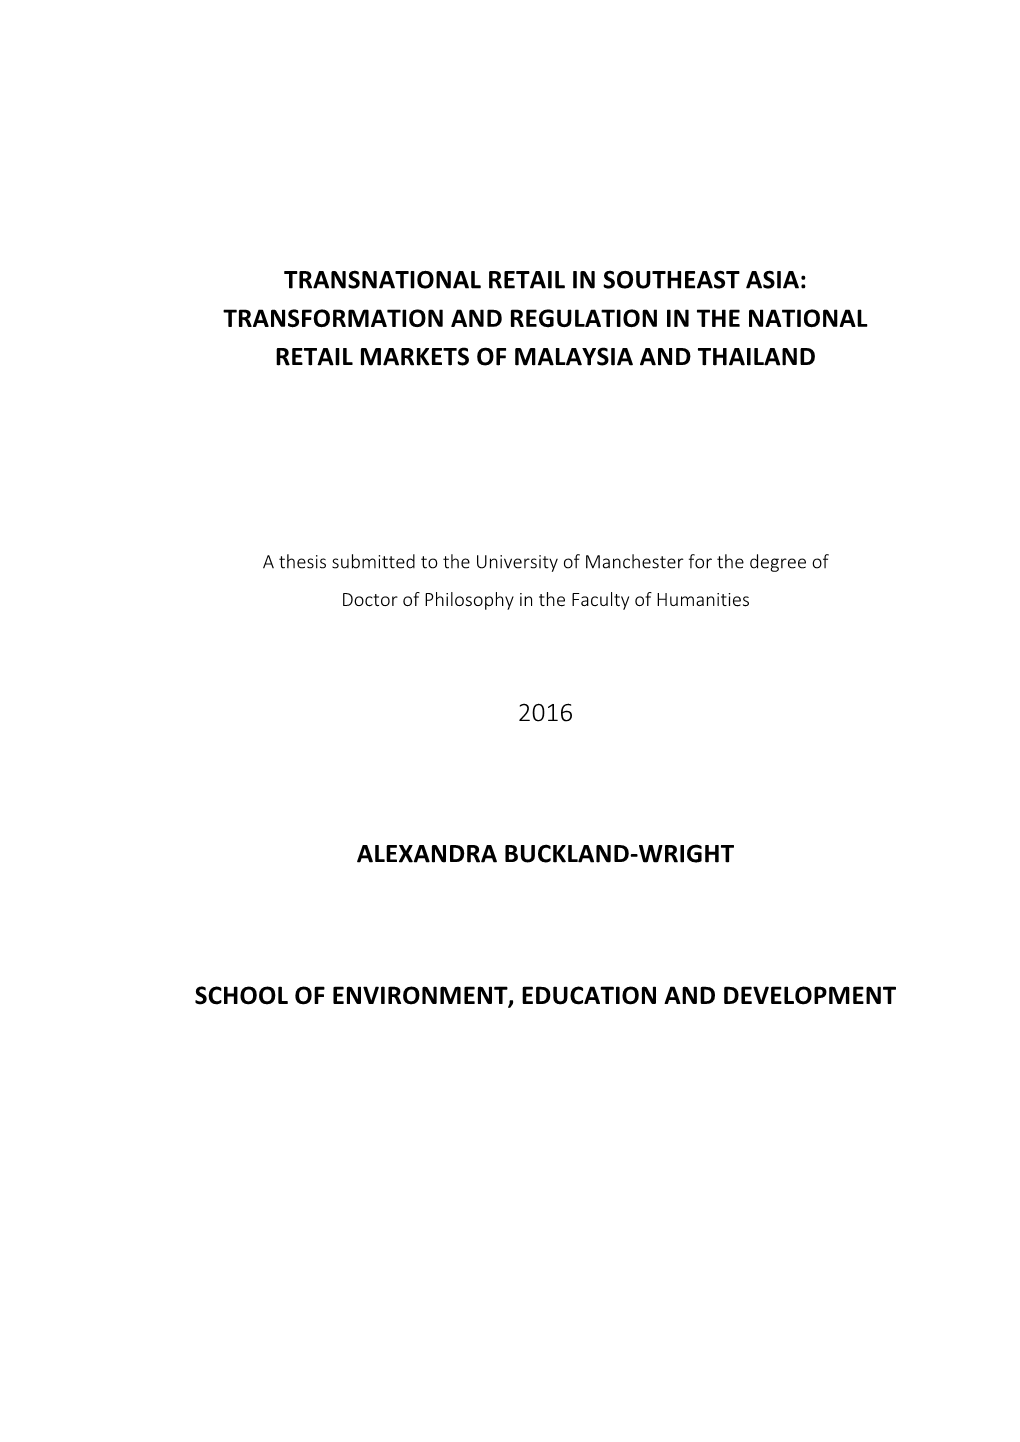 Transnational Retail in Southeast Asia: Transformation and Regulation in the National Retail Markets of Malaysia and Thailand